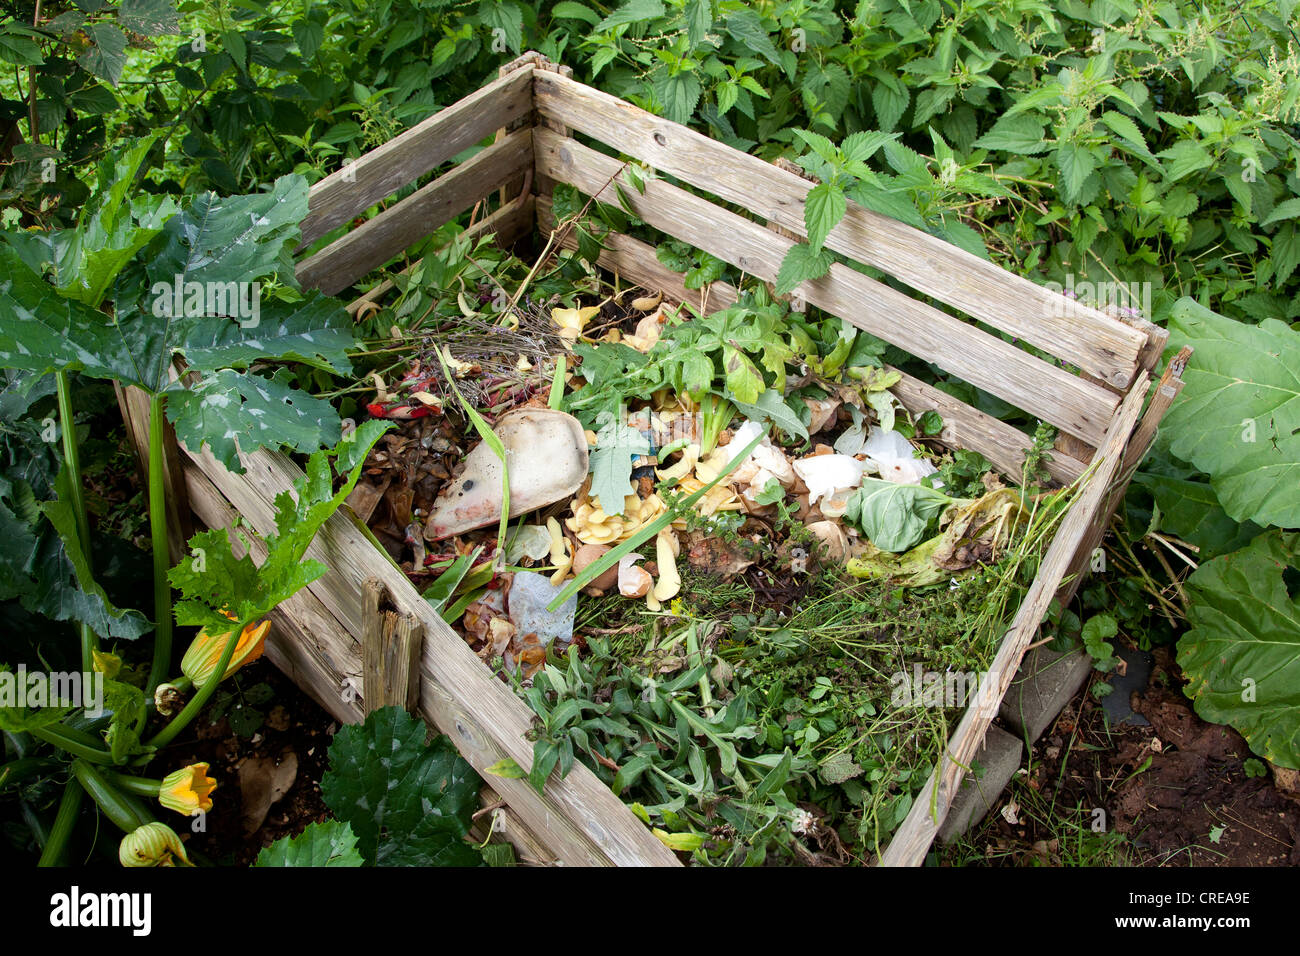 Organic waste, compost, compost heap, Germany, Europe Stock Photo